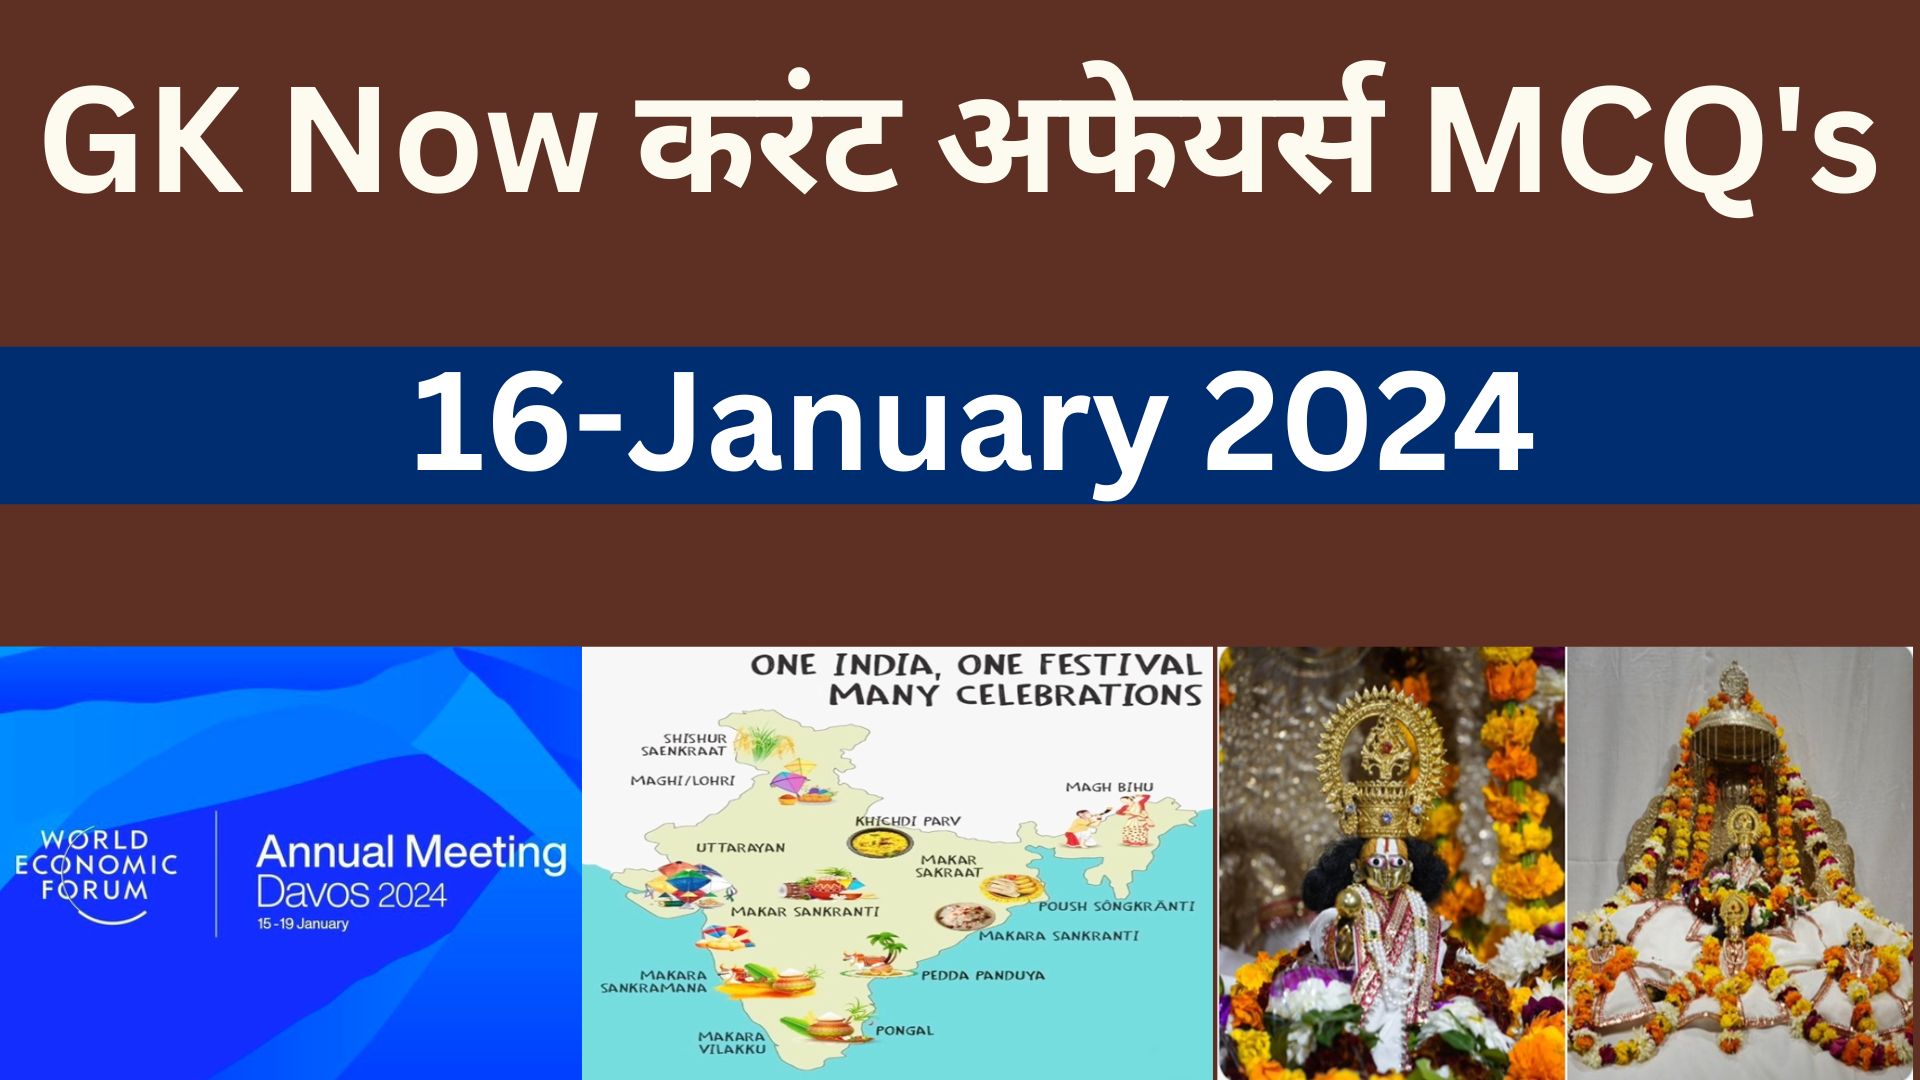 Daily Current Affairs MCQ 16 January 2024 GK Now